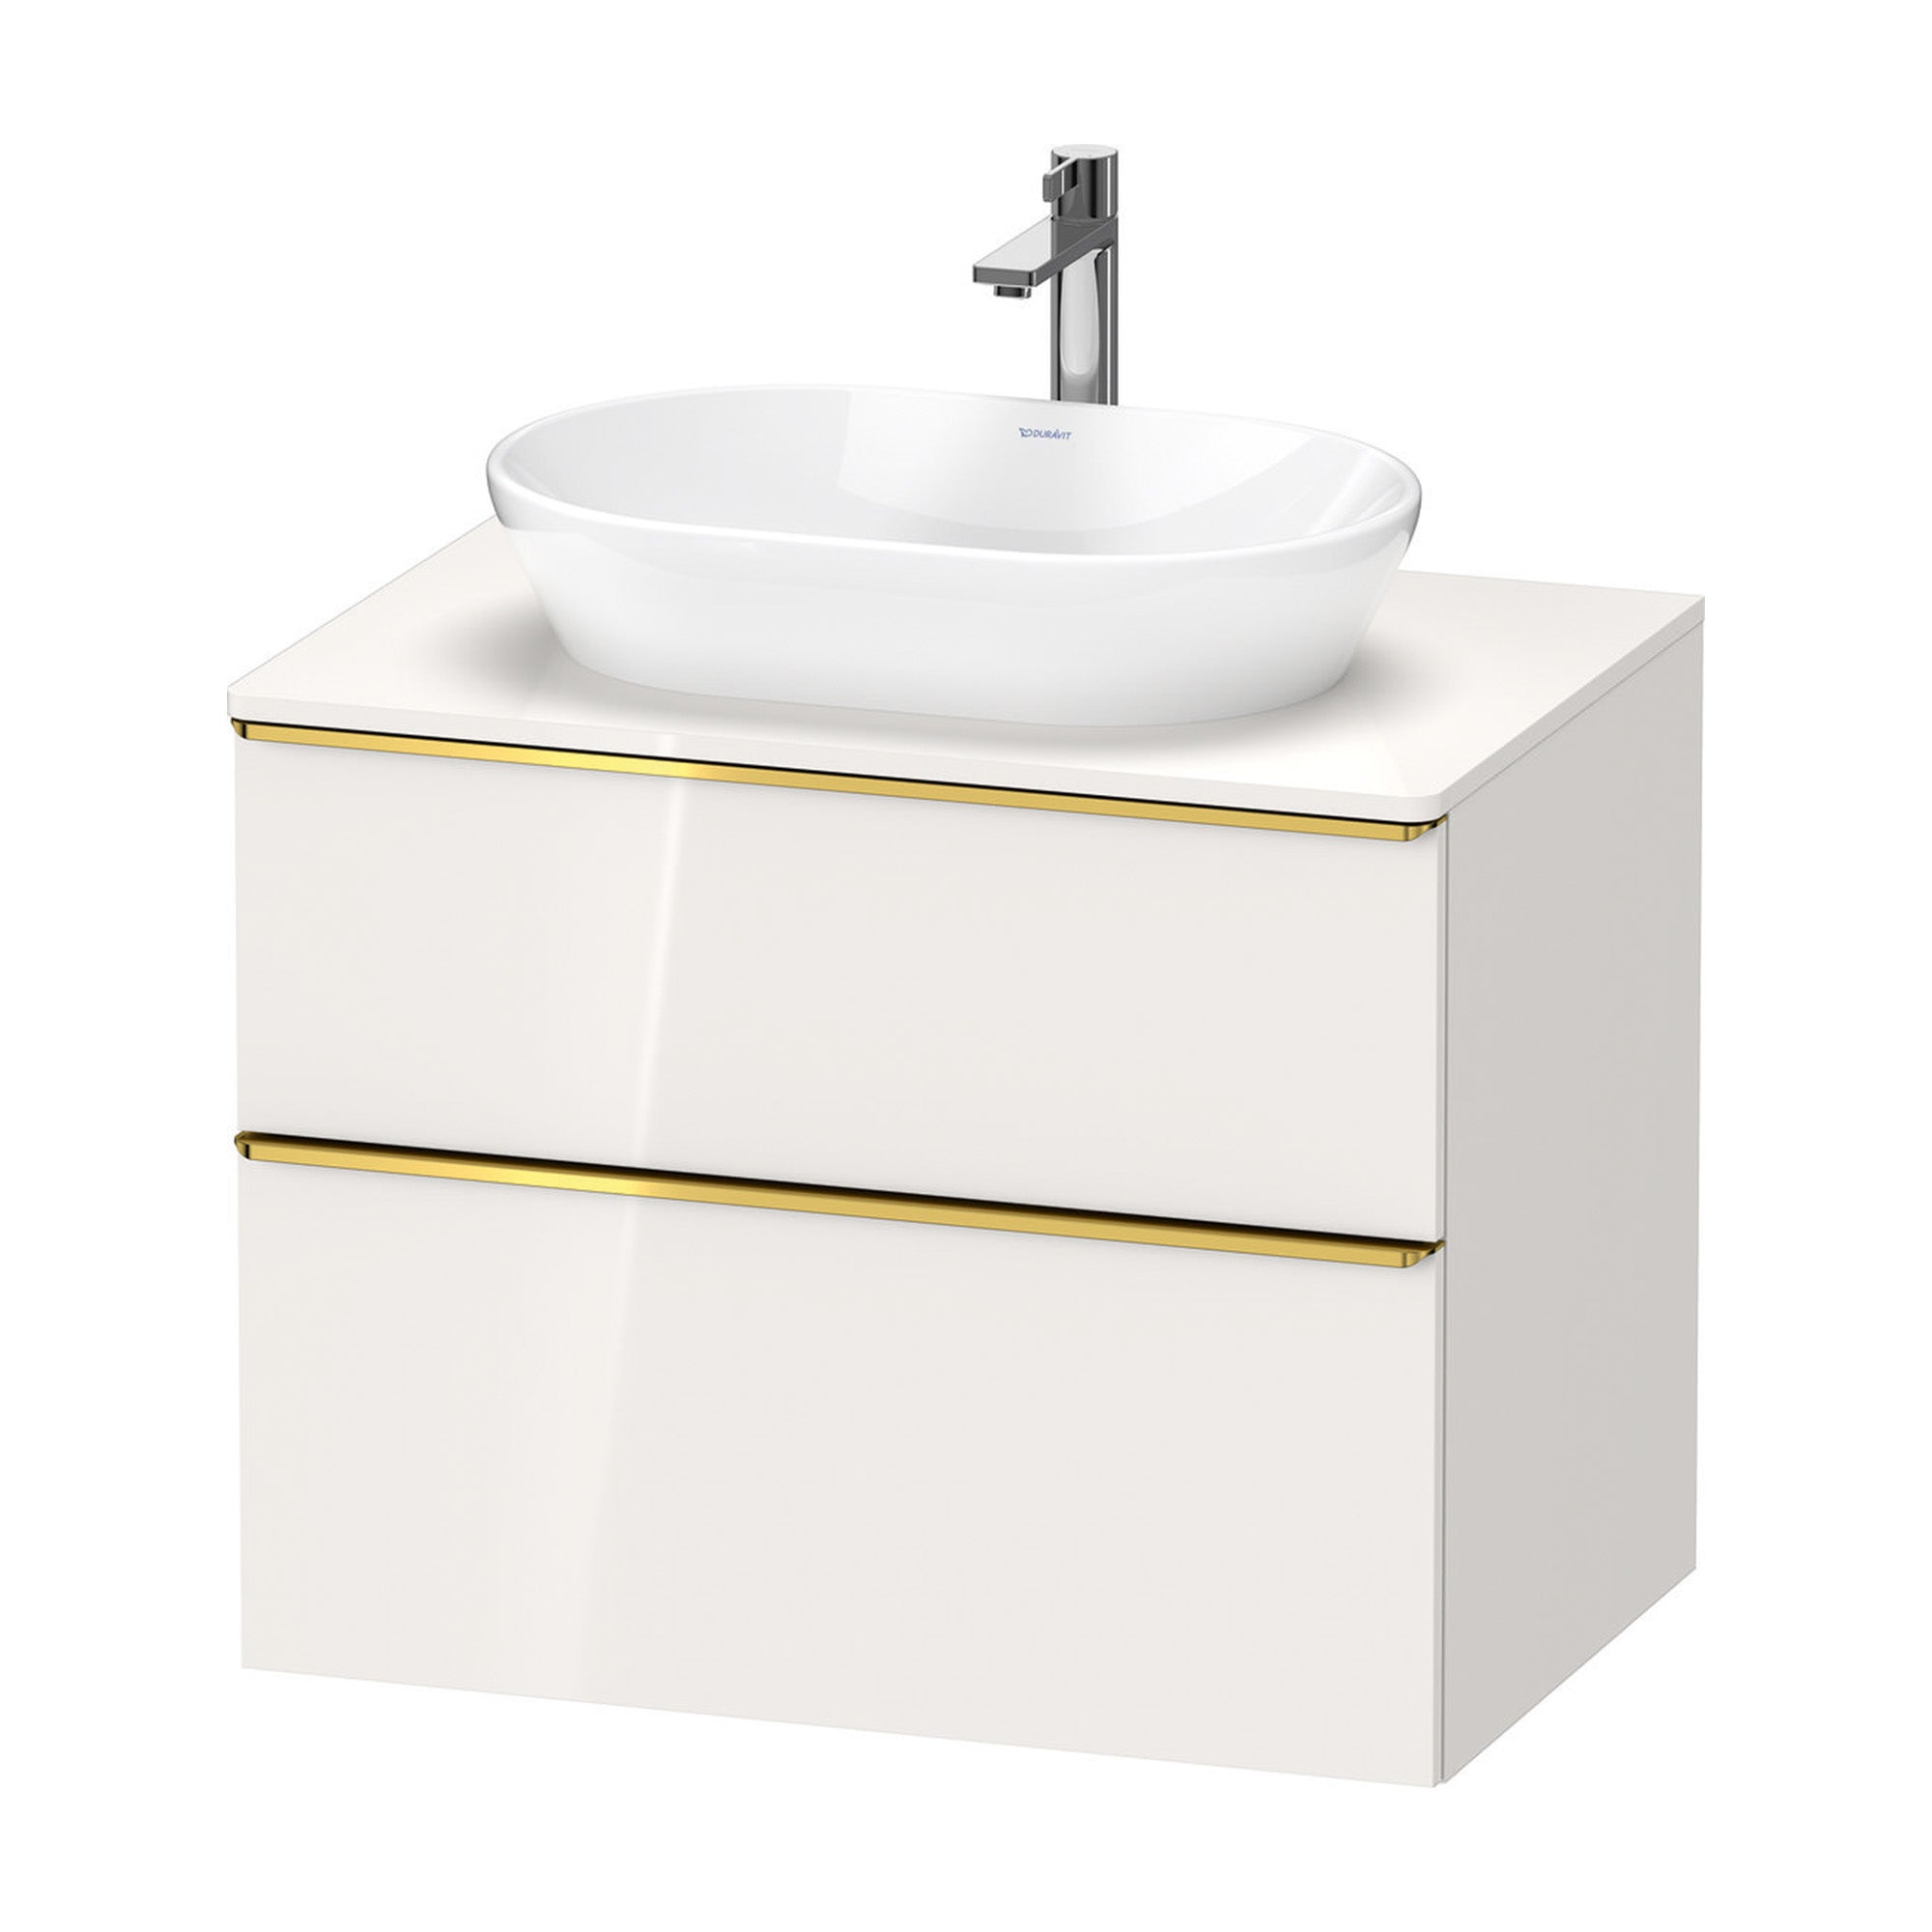 duravit d-neo 800 wall mounted vanity unit with worktop white gloss gold handles